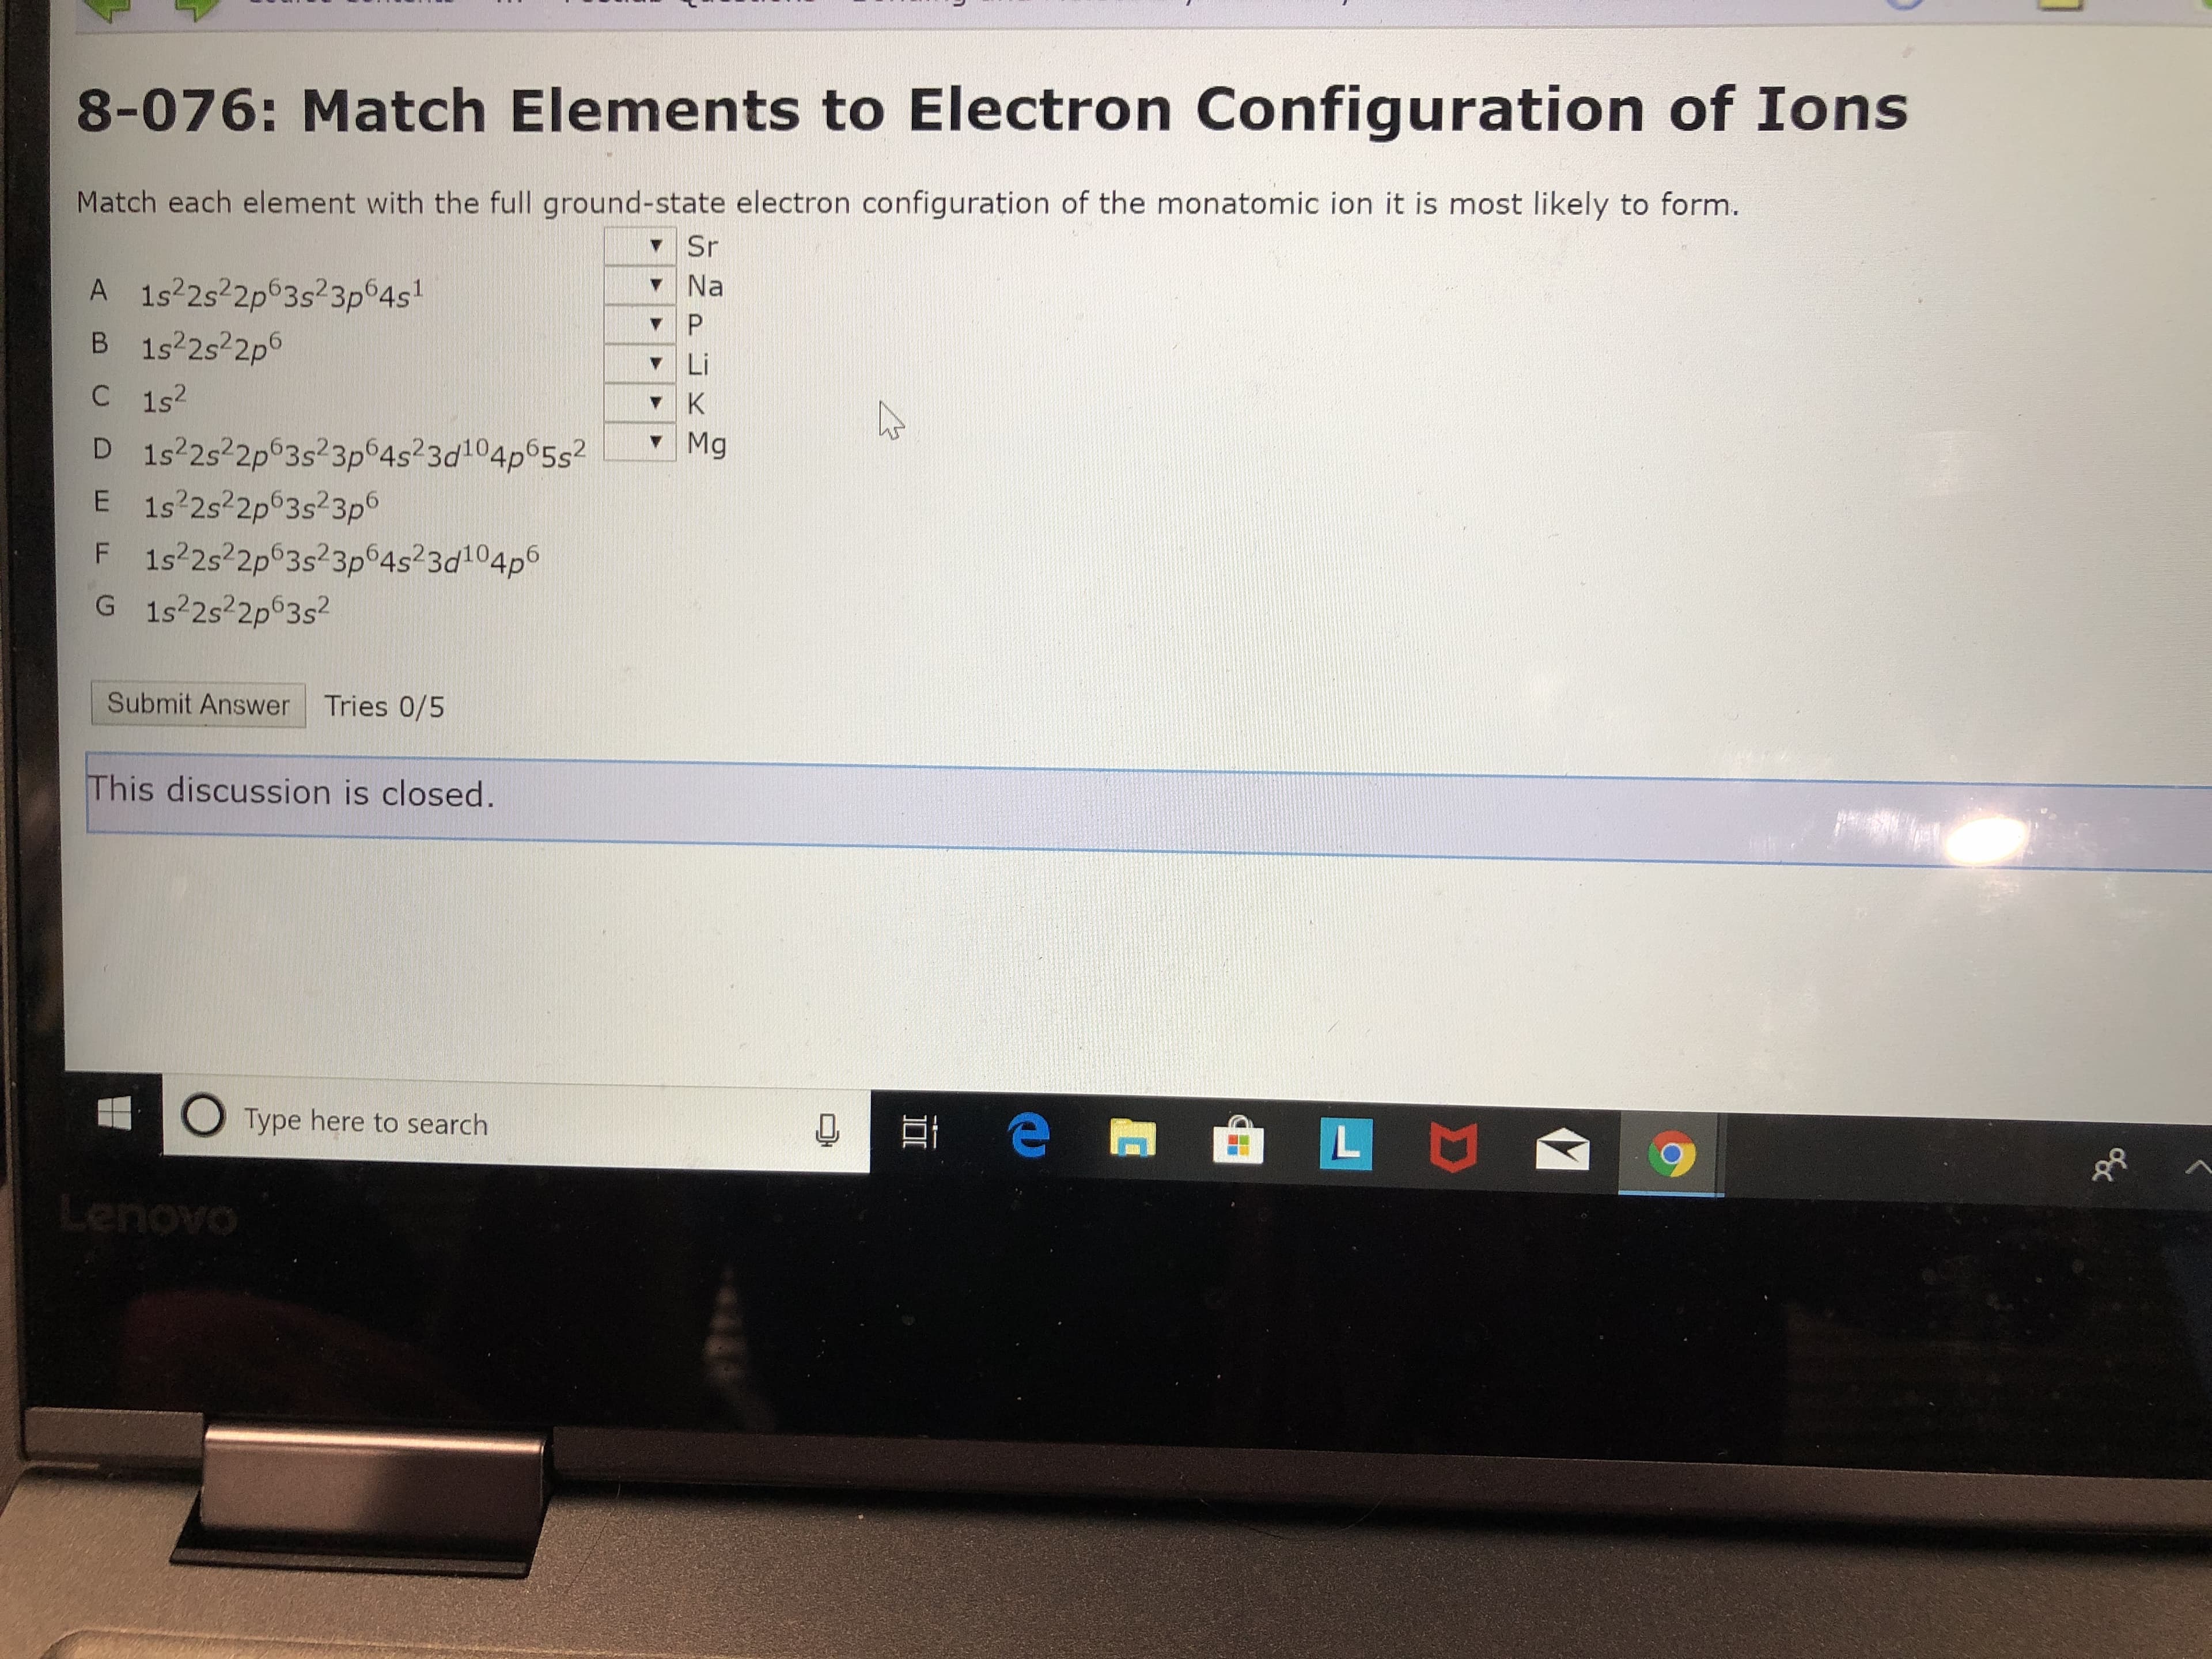 8-076: Match Elements to Electron Configuration of Ions
Match each element with the full ground-state electron configuration of the monatomic ion it is most likely to form.
Sr
Na
A 1s22s22p63s23p64s
B 1s22s22p6
P
Li
C 1s2
K
Mg
D 1s22s22p63s23p64s23d104p65s2
E 1s22s22p 3s23p
F 1s22s22p63s23p64s23d104p
G 1s22s22p63s2
Tries 0/5
Submit Answer
This discussion is closed.
L I
Type here to search
OAOUne
